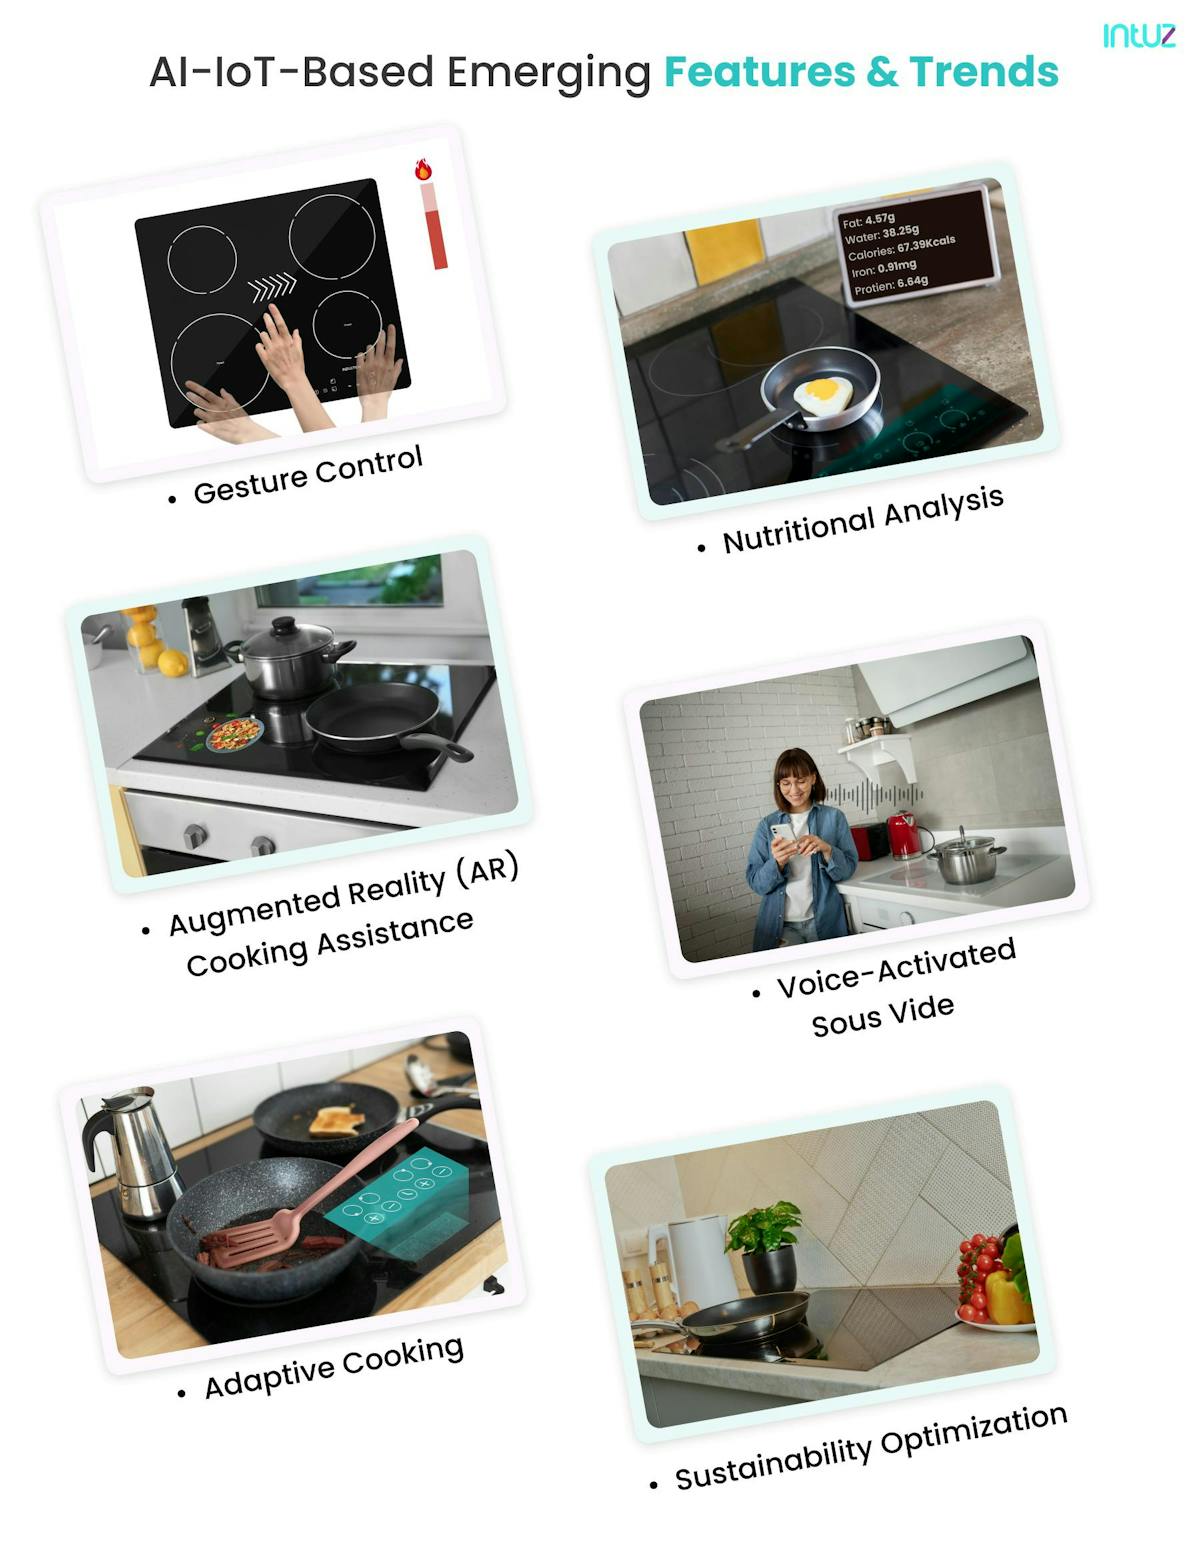 Ai-iot based Smart cooktop features